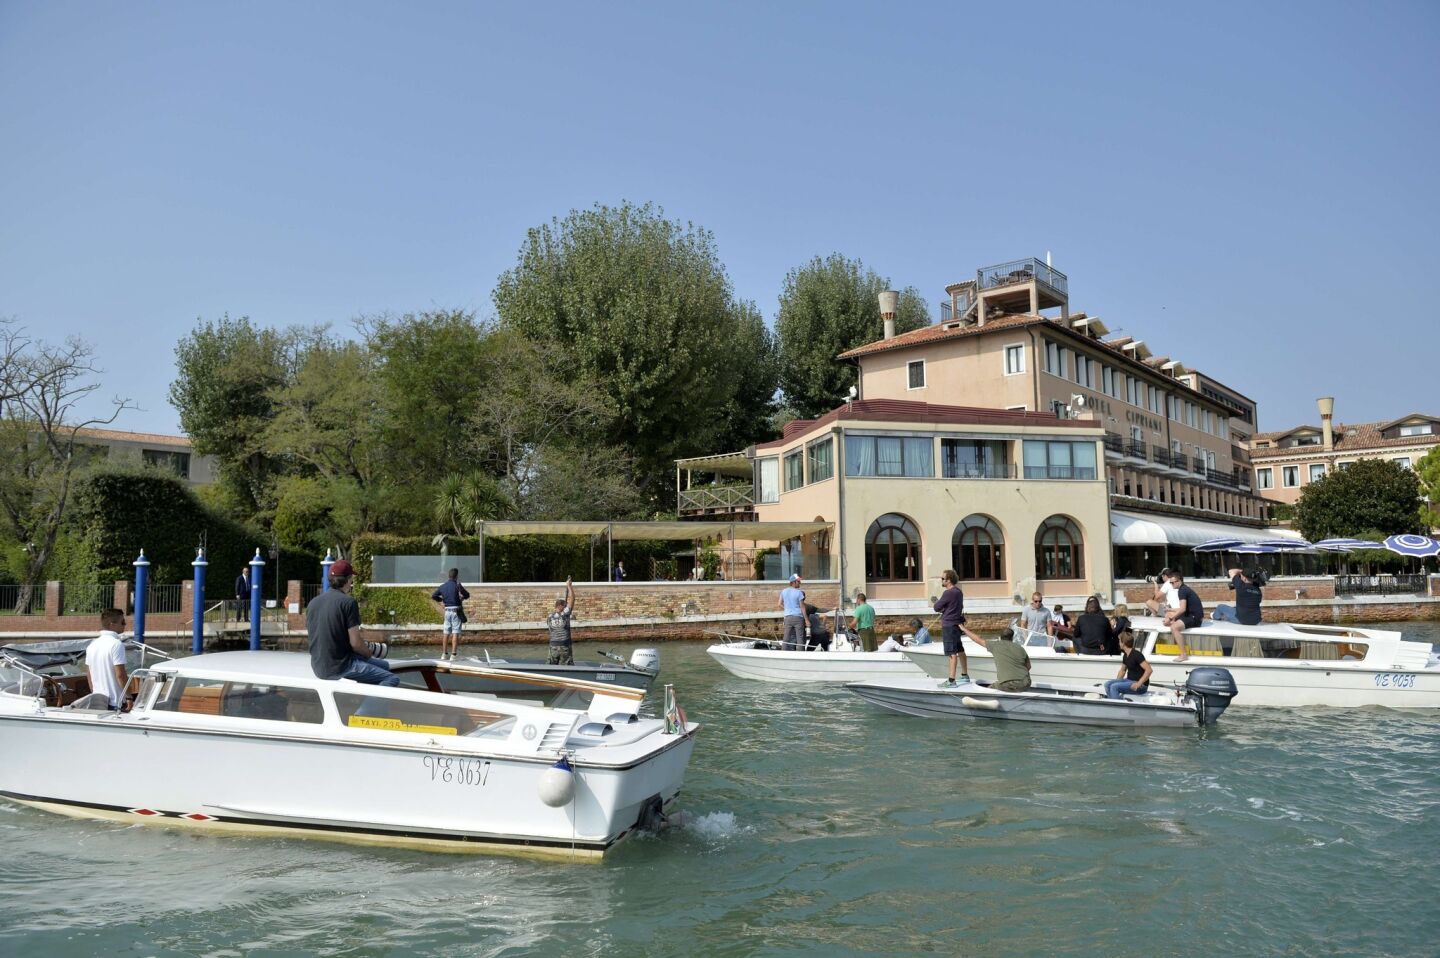 Photographers stand on boats Saturday in the canal in front of the Cipriani Hotel, where George Clooney and a number of wedding guests were staying.